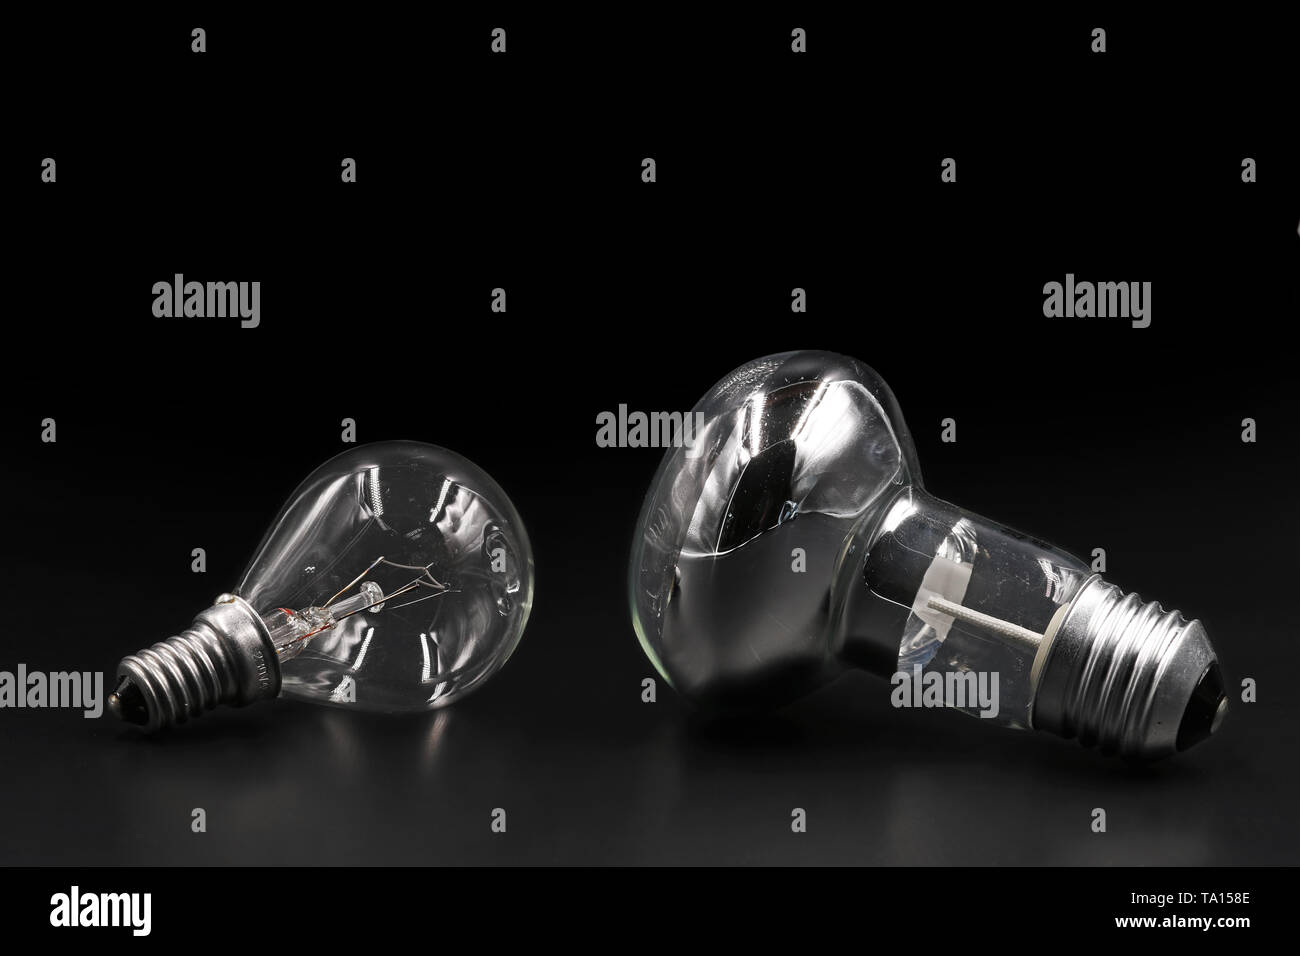 Two types of light bulbs on black background with copy space Stock Photo